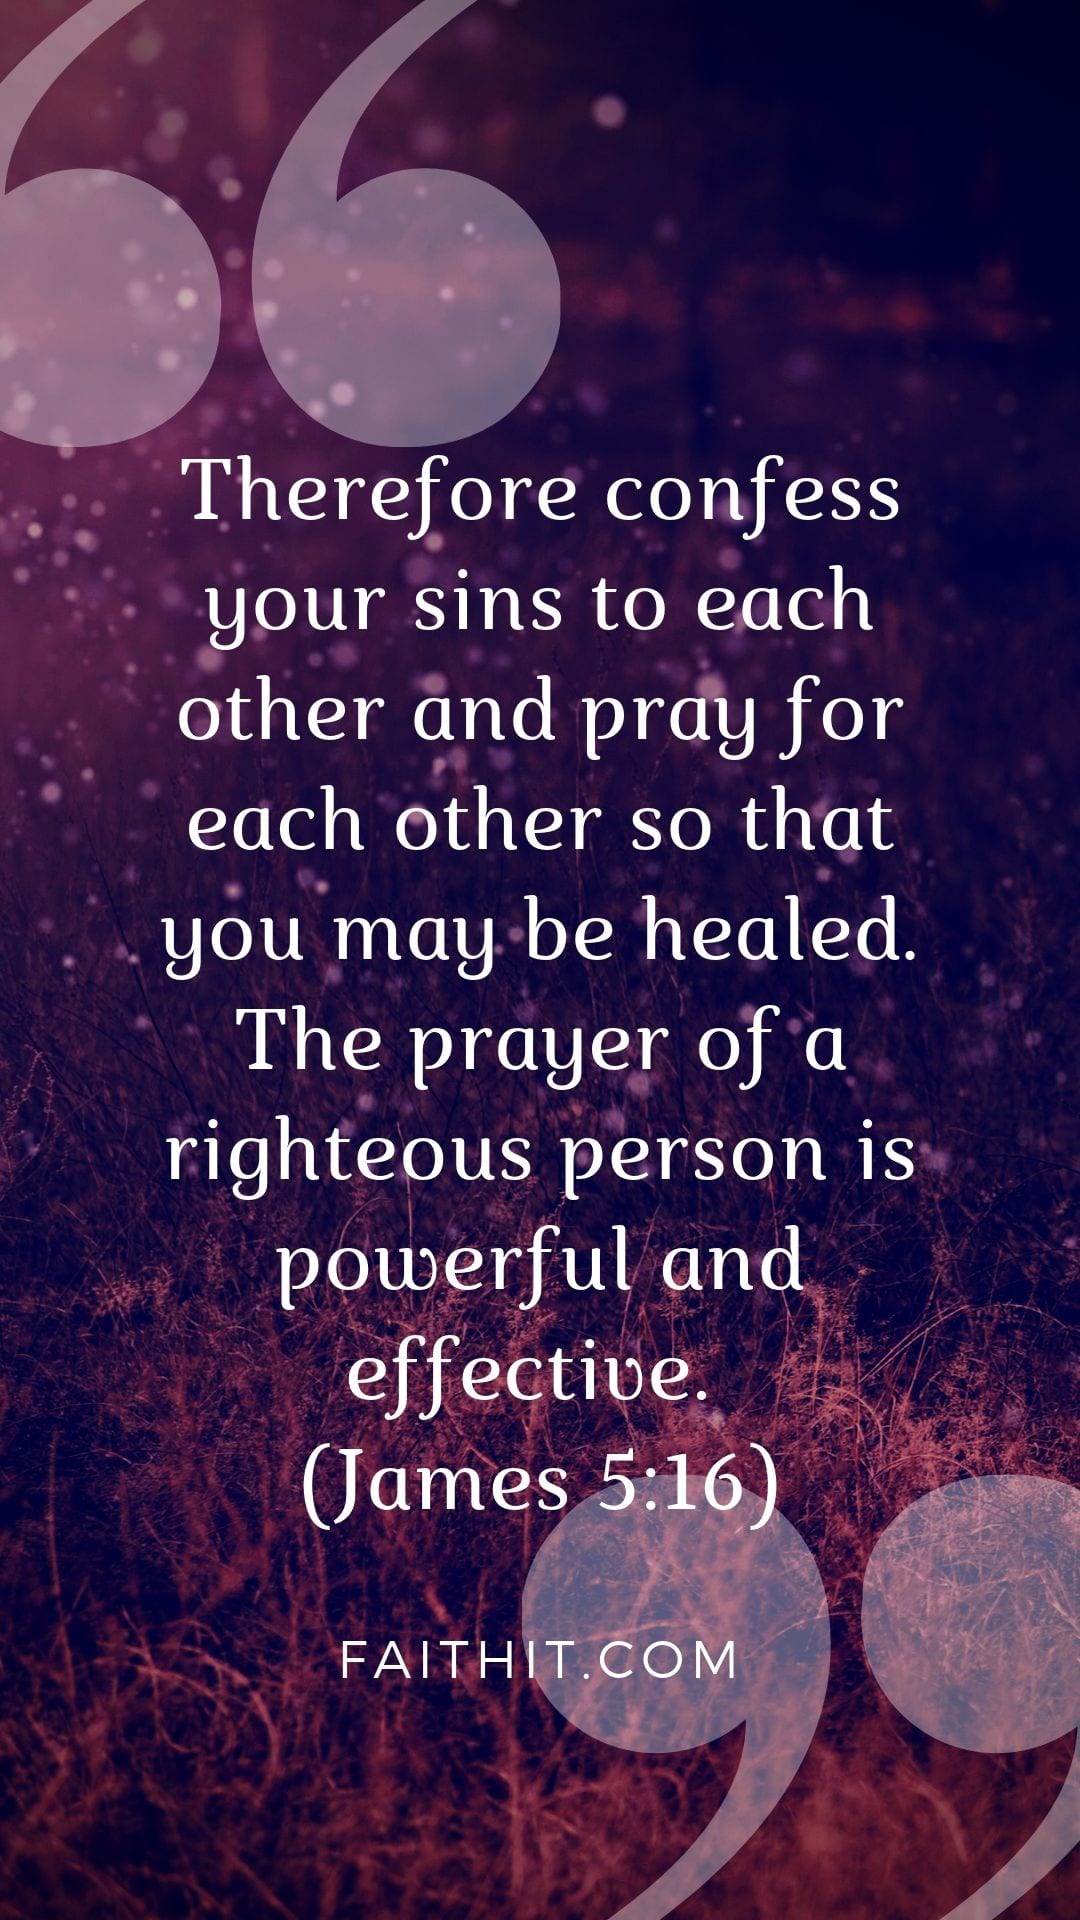 Therefore confess your sins to each other and pray for each other so that you may be healed. The prayer of a righteous person is powerful and effective. (James 5:16)